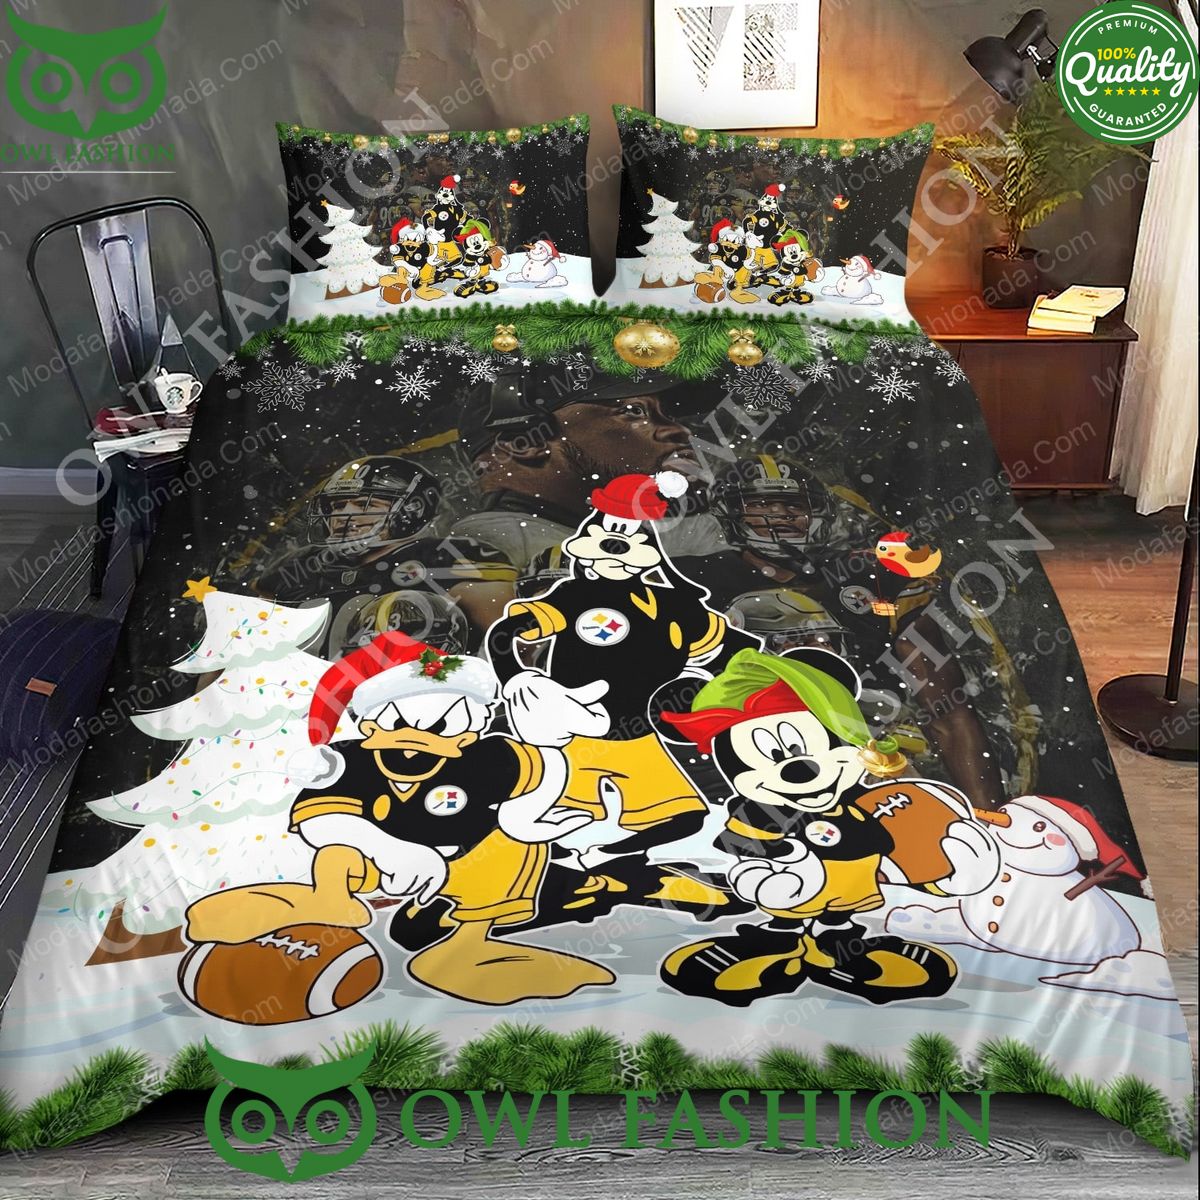 Mickey Donald Goofy NFL Pittsburgh Steelers Christmas Bedding Sets